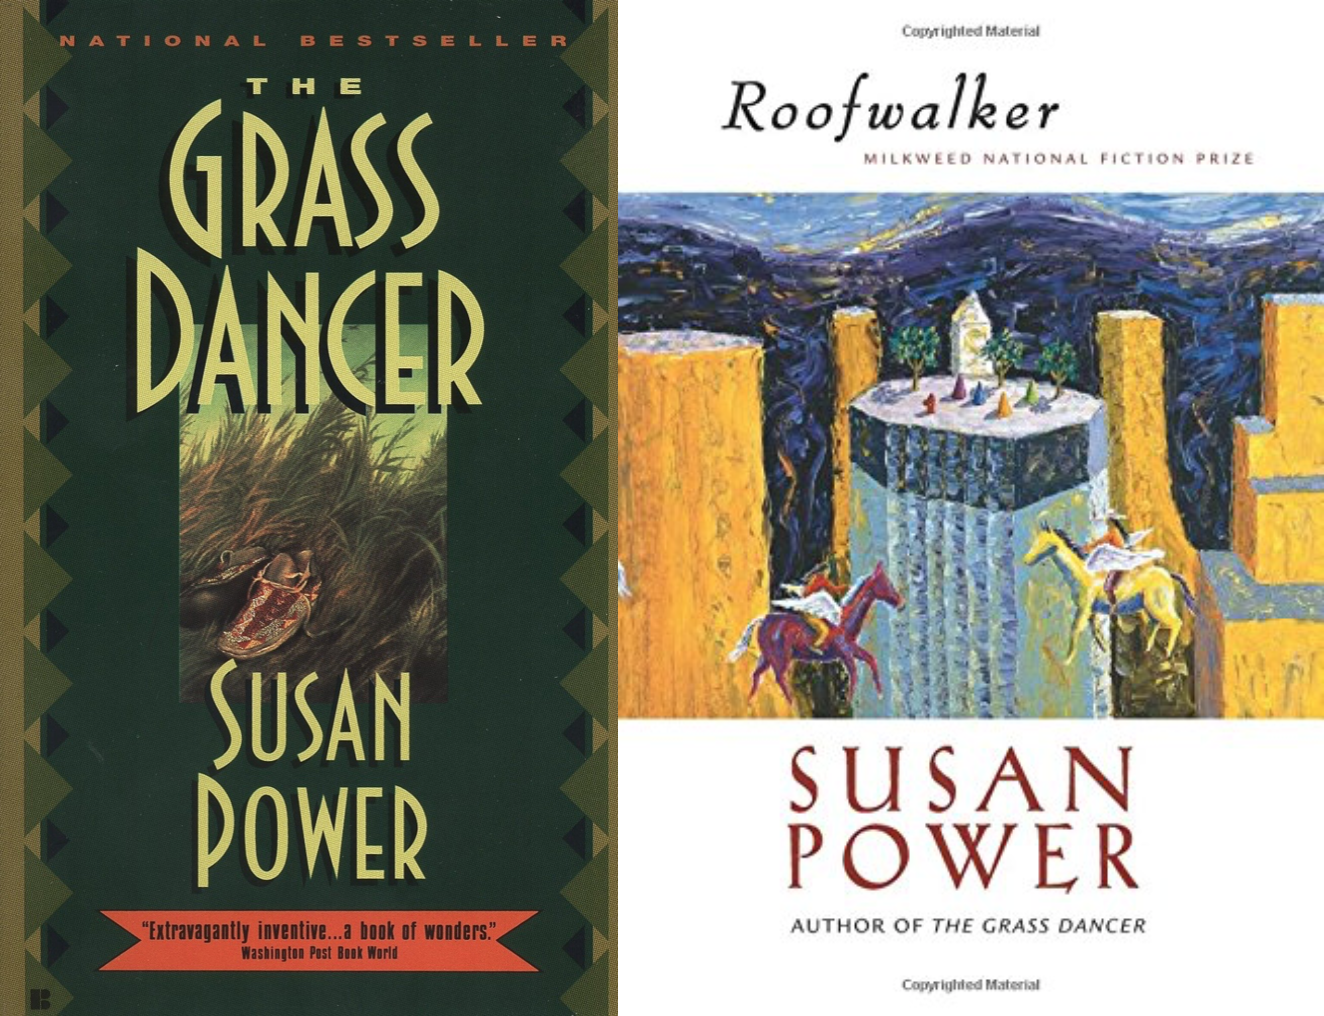 Cover art for The Grass Dancer and Roofwalker by Susan Power